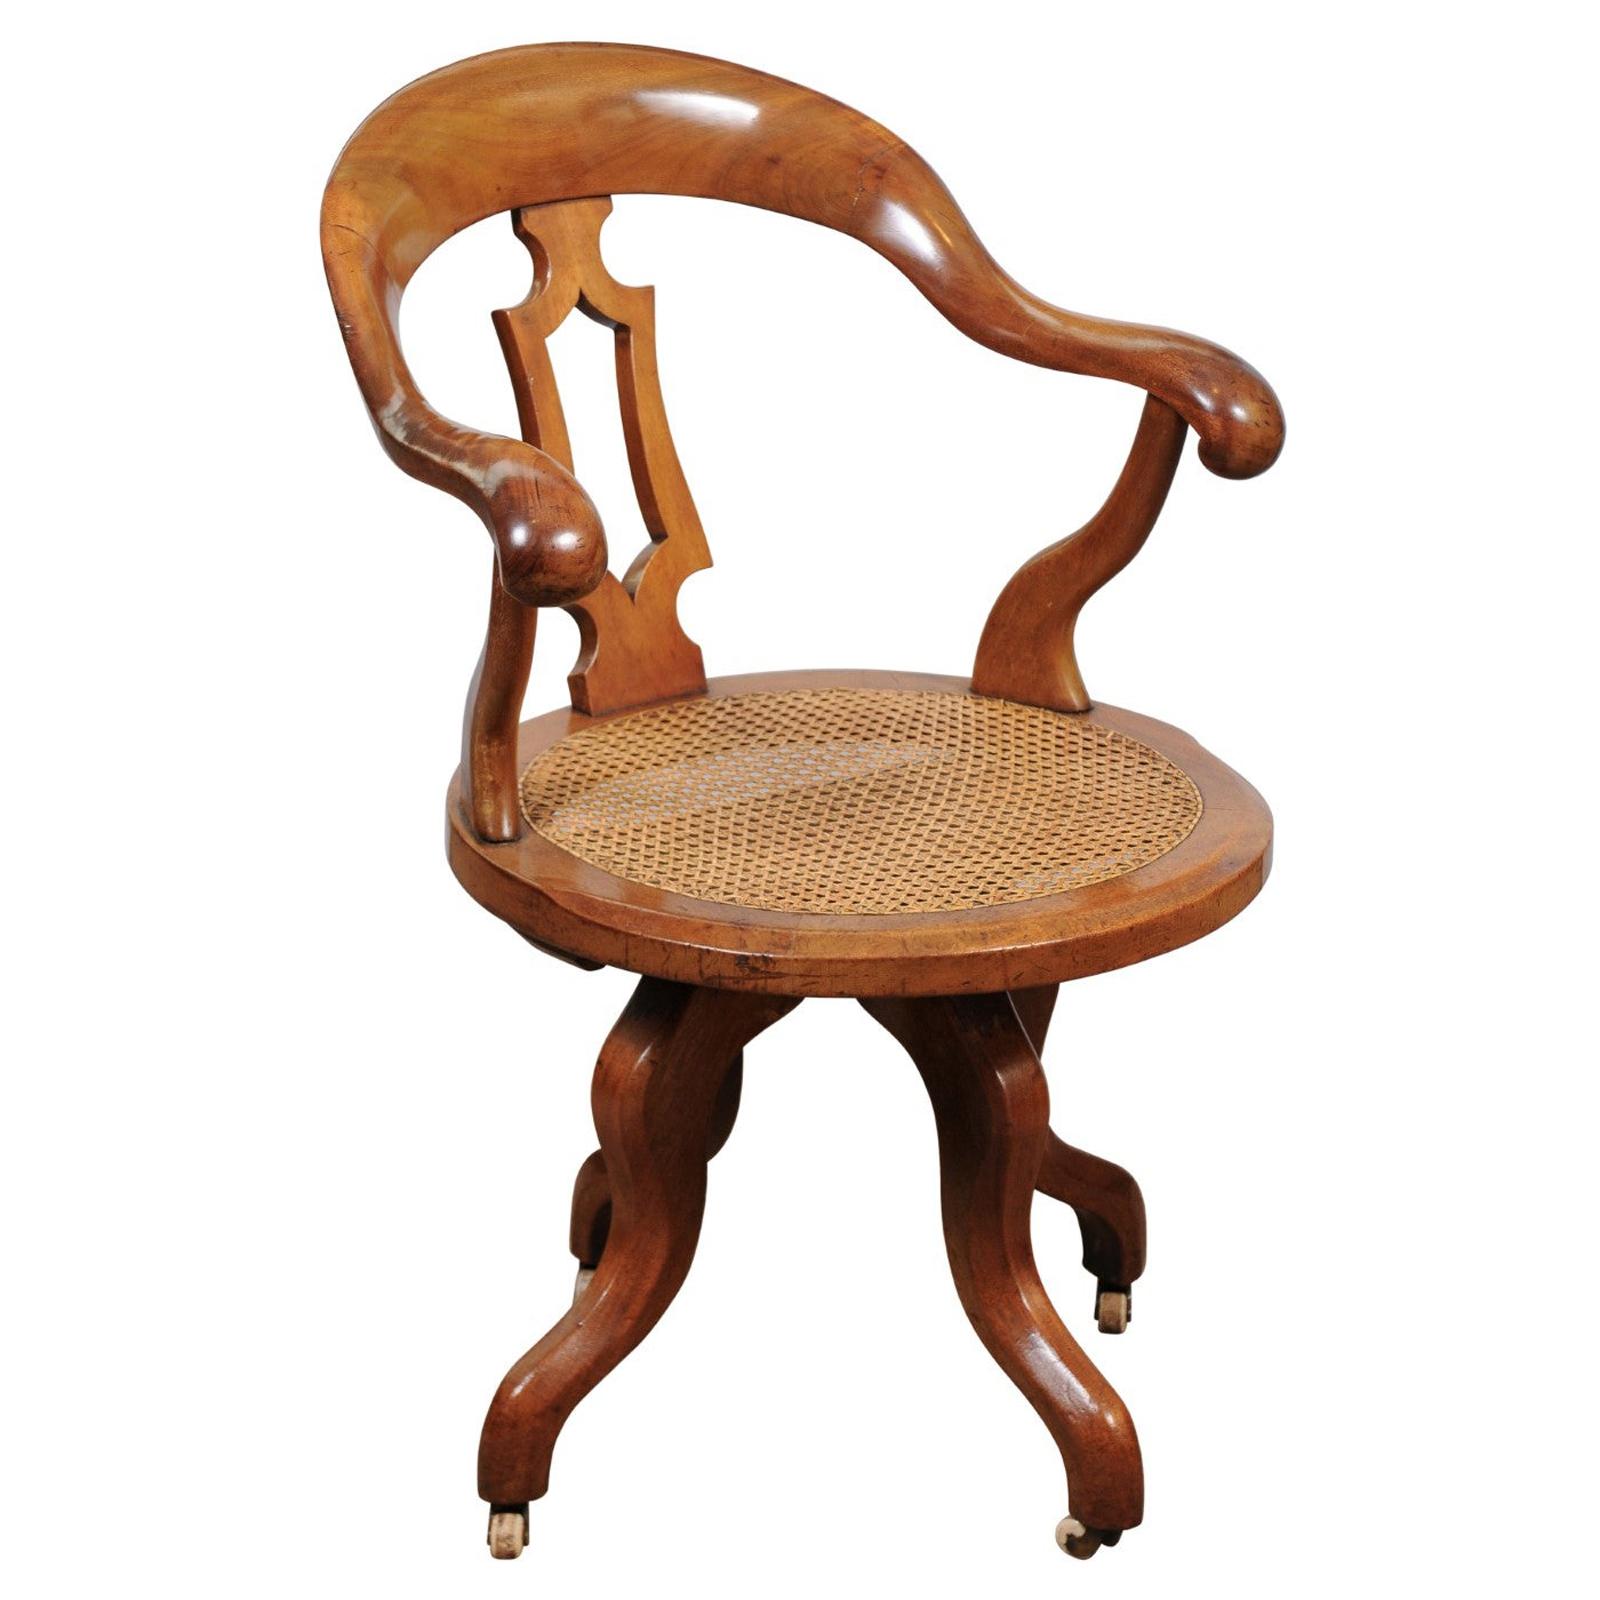 Victorian Walnut Desk Chair with Swivel Caned Seat, England, Late 19th Century